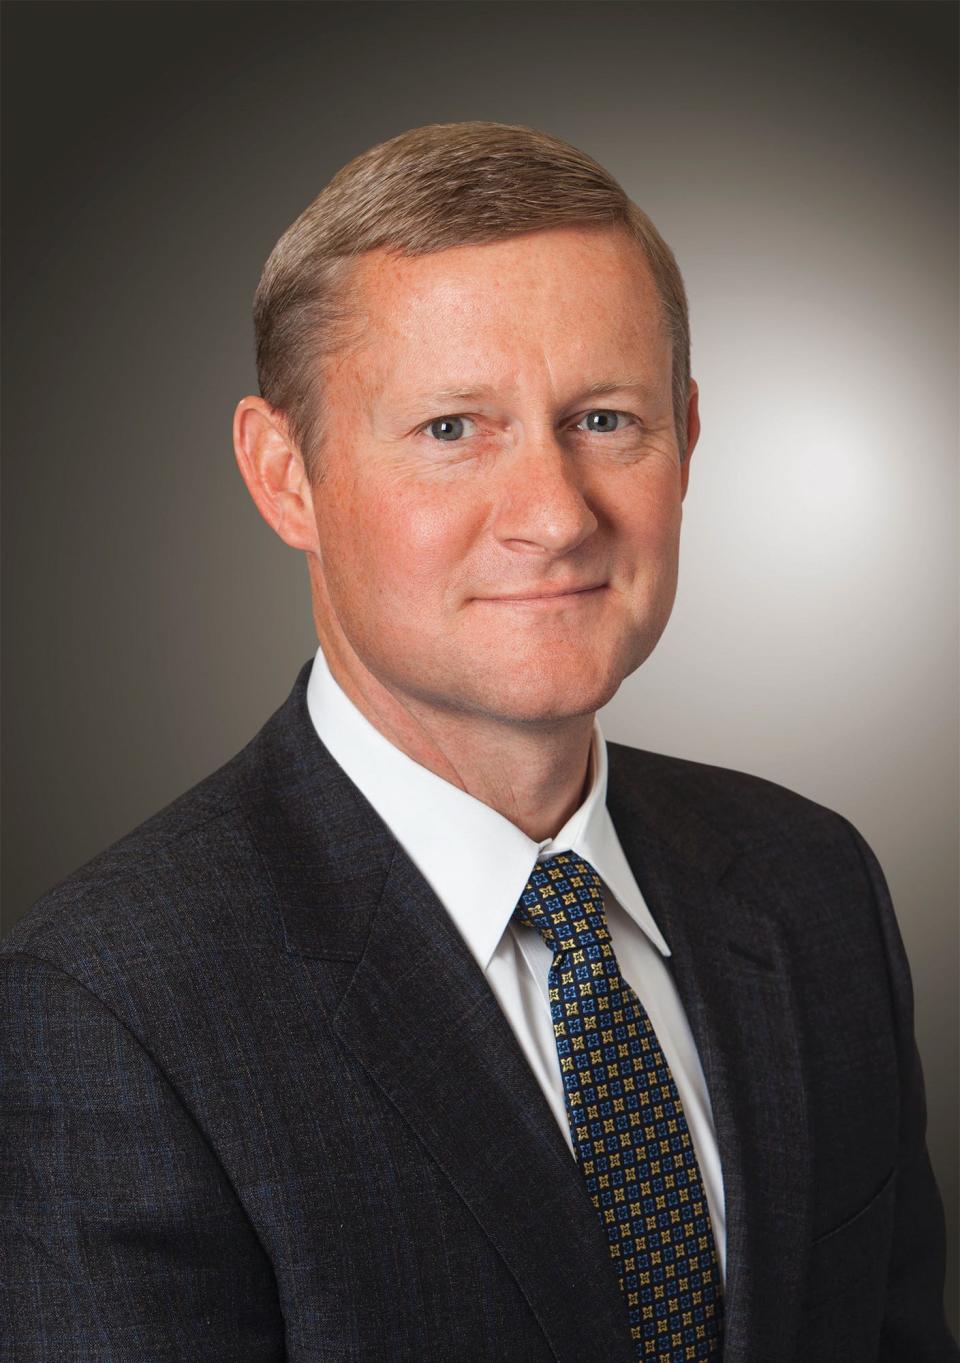 John May was elected to chairman of Deere & Co.'s board of directors, effective May 1, 2020. He became CEO of the Moline, Illinois, farm and construction manufacturer in November 2019.